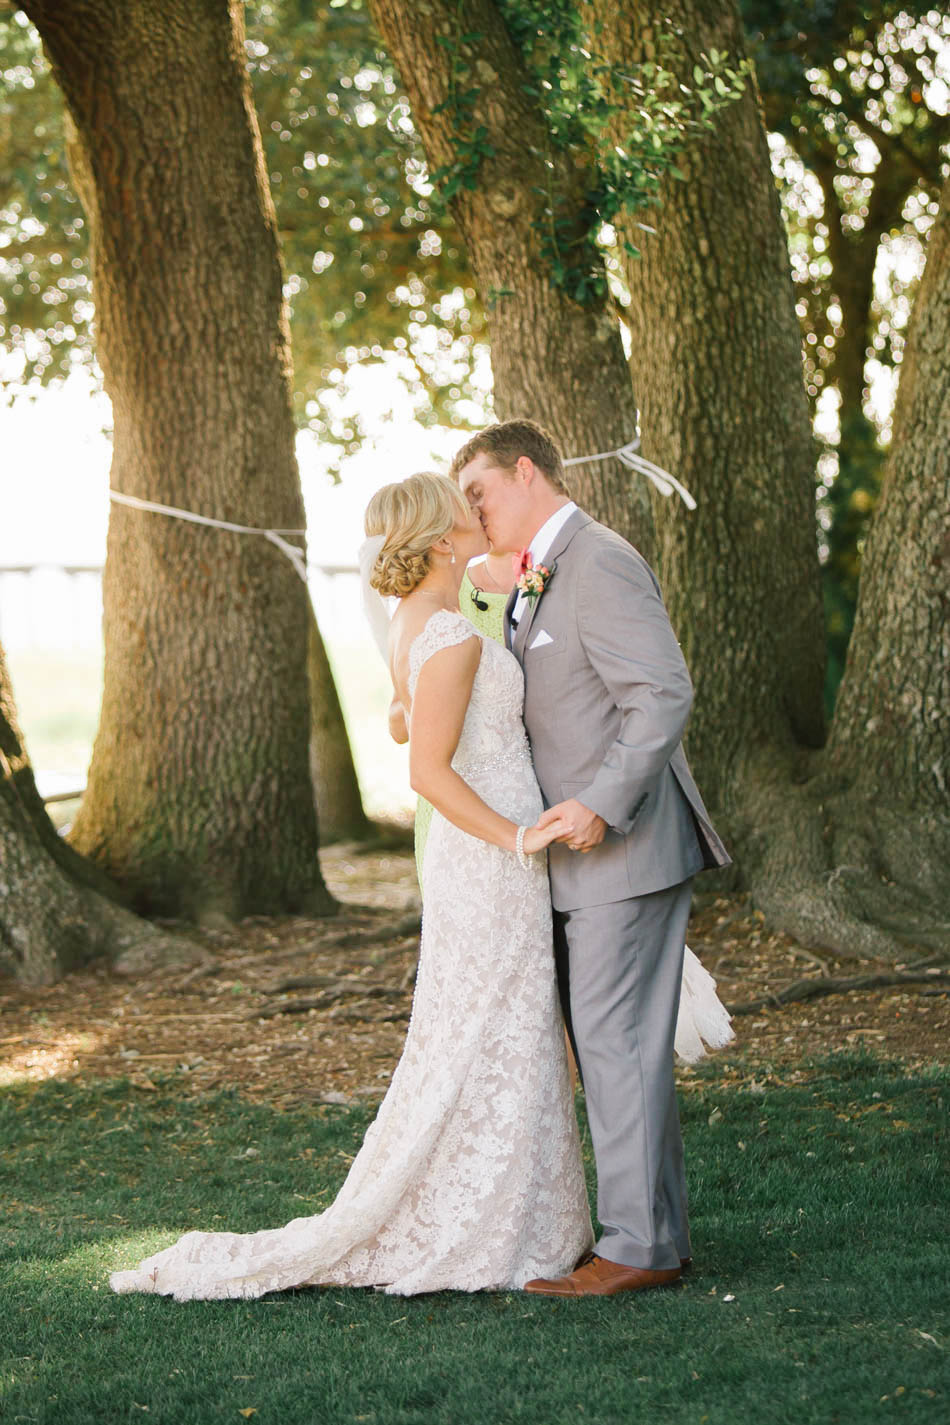 Bride and groom kiss, Alhambra Hall, Mt Pleasant, South Carolina Kate Timbers Photography. http://katetimbers.com #katetimbersphotography // Charleston Photography // Inspiration